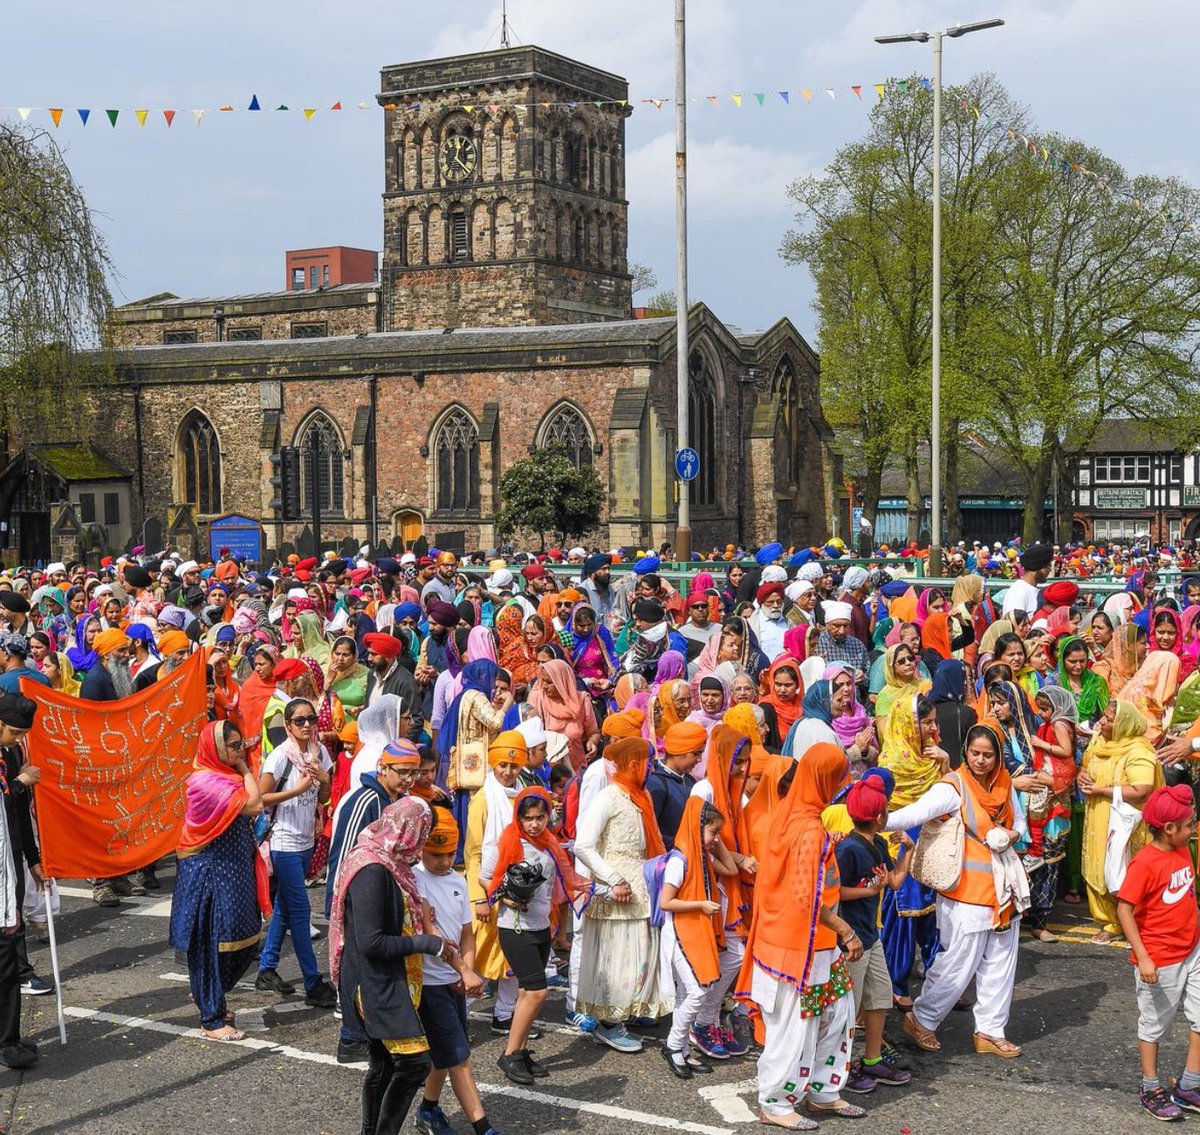 Happy #Vaisakhi to all my Sikh friends here in #Leicester and elsewhere, who are celebrating today and over the weekend. Pic (from Leicester Mercury) of gathering in front of the city centre church of @StNicholasLeics